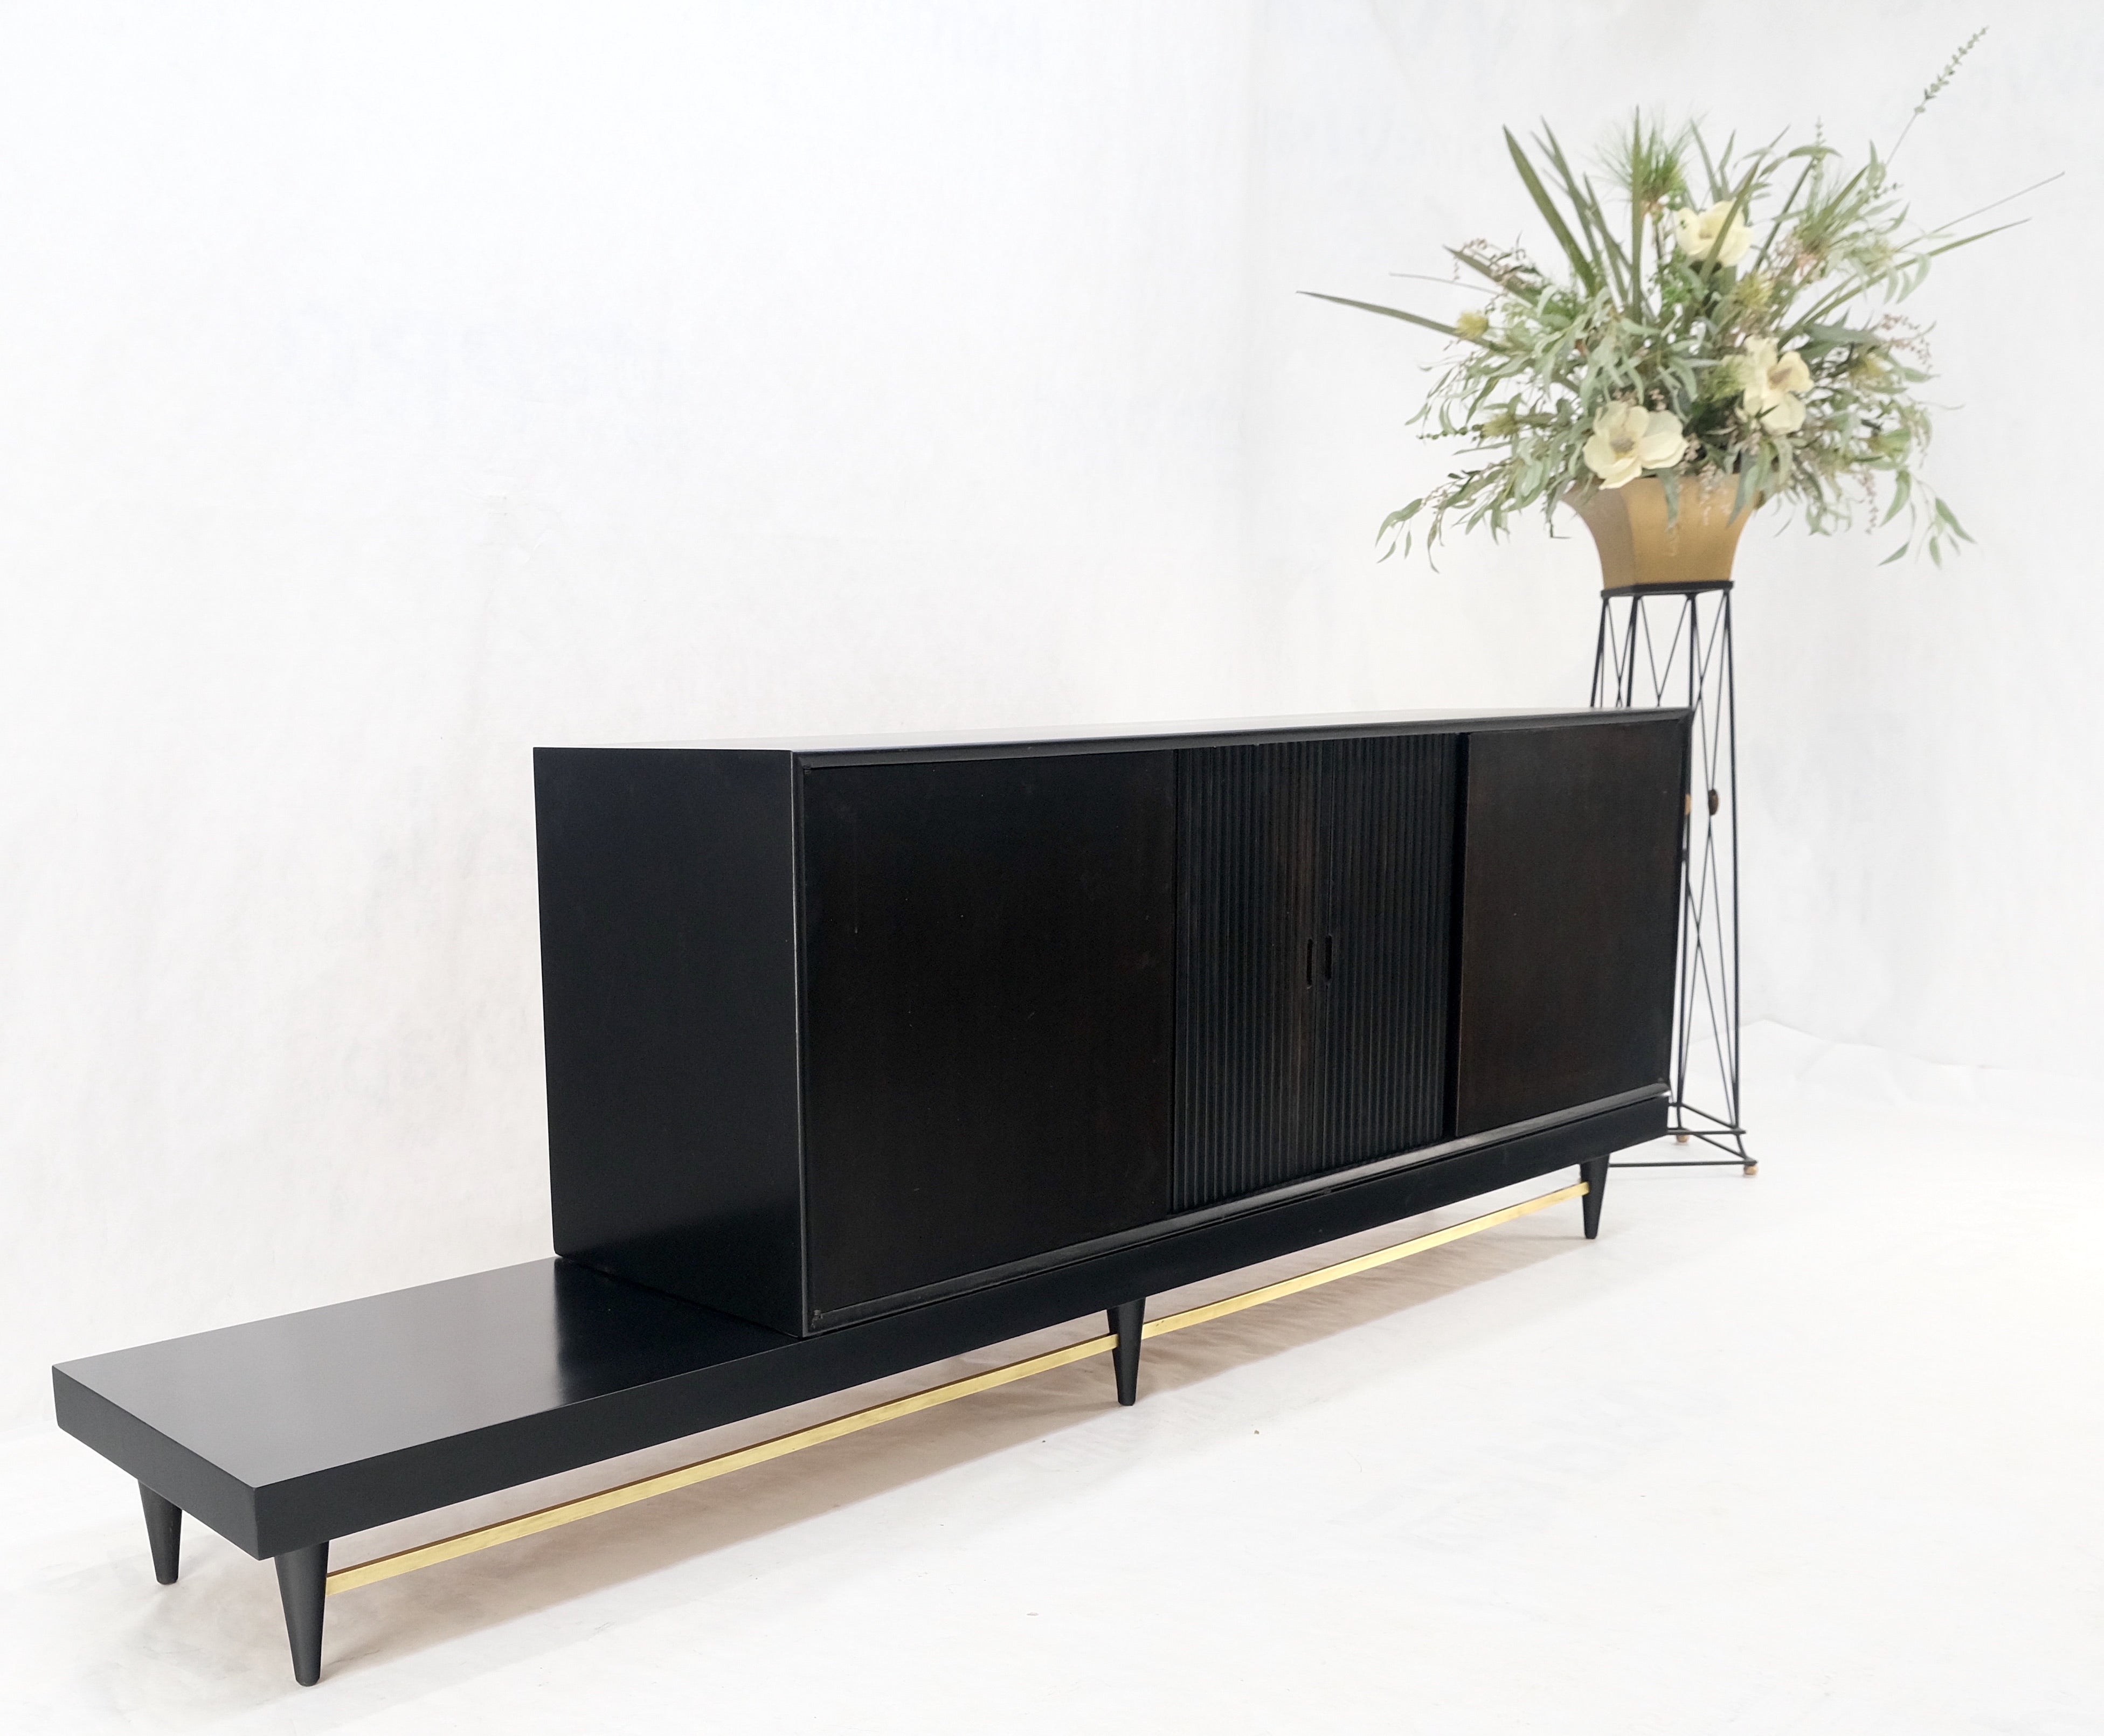 Mid-Century Modern Black Lacquer ebonized Tambour Doors Credenza Dresser on Platform Brass Stretcher MINT!
This is two parts cabinet can be arranged as a 